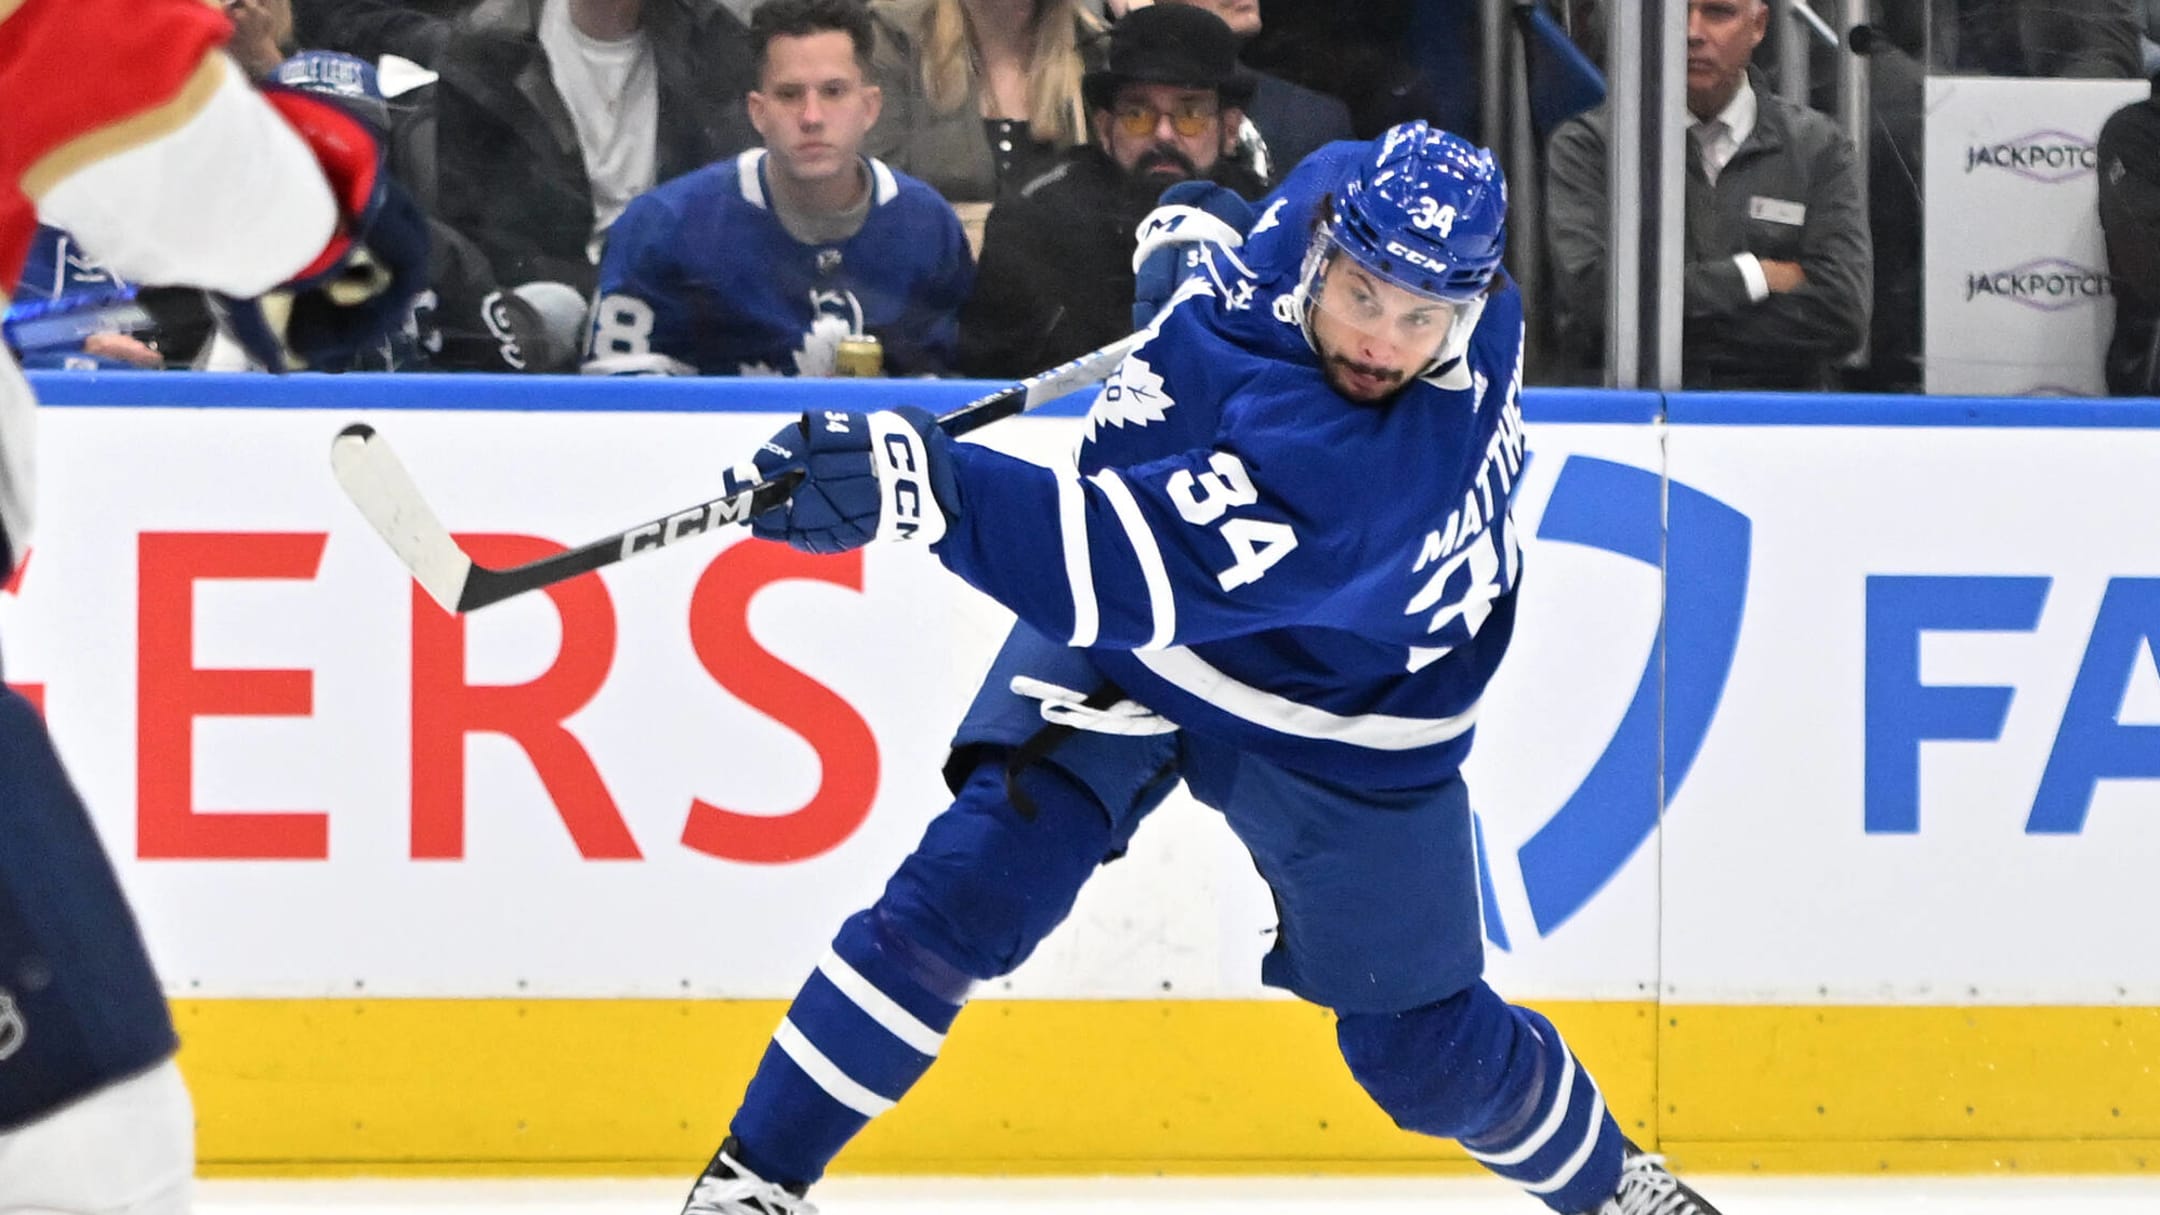 Maple Leafs signed Treliving to ask Matthews tough questions